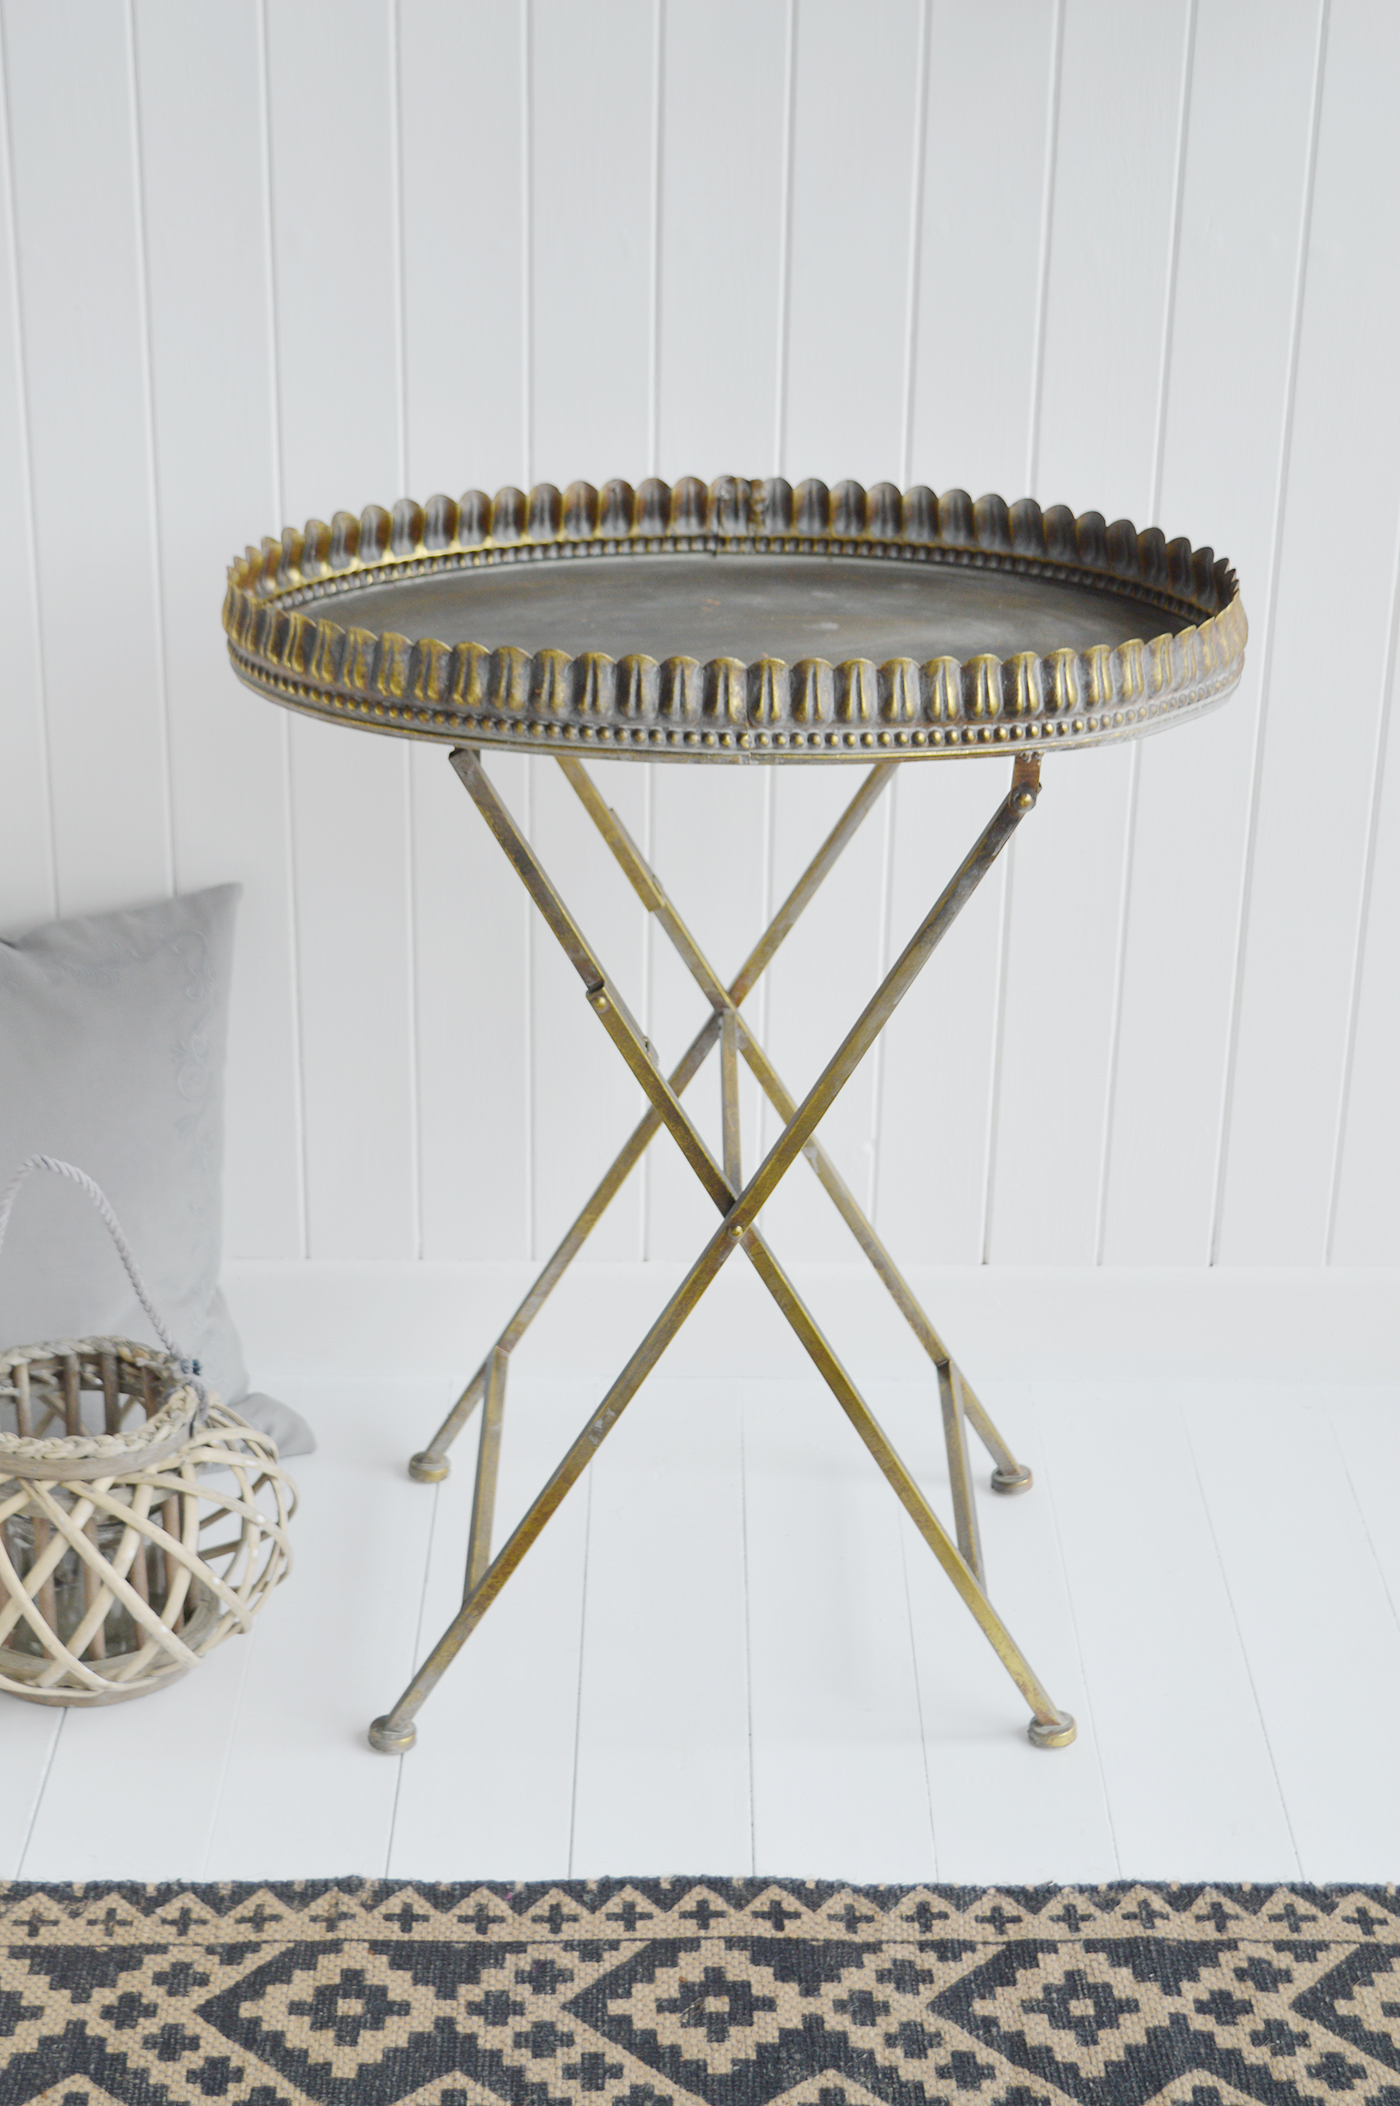 Mystic lamp table in aged antique brass finish. New England furniture and home interiors